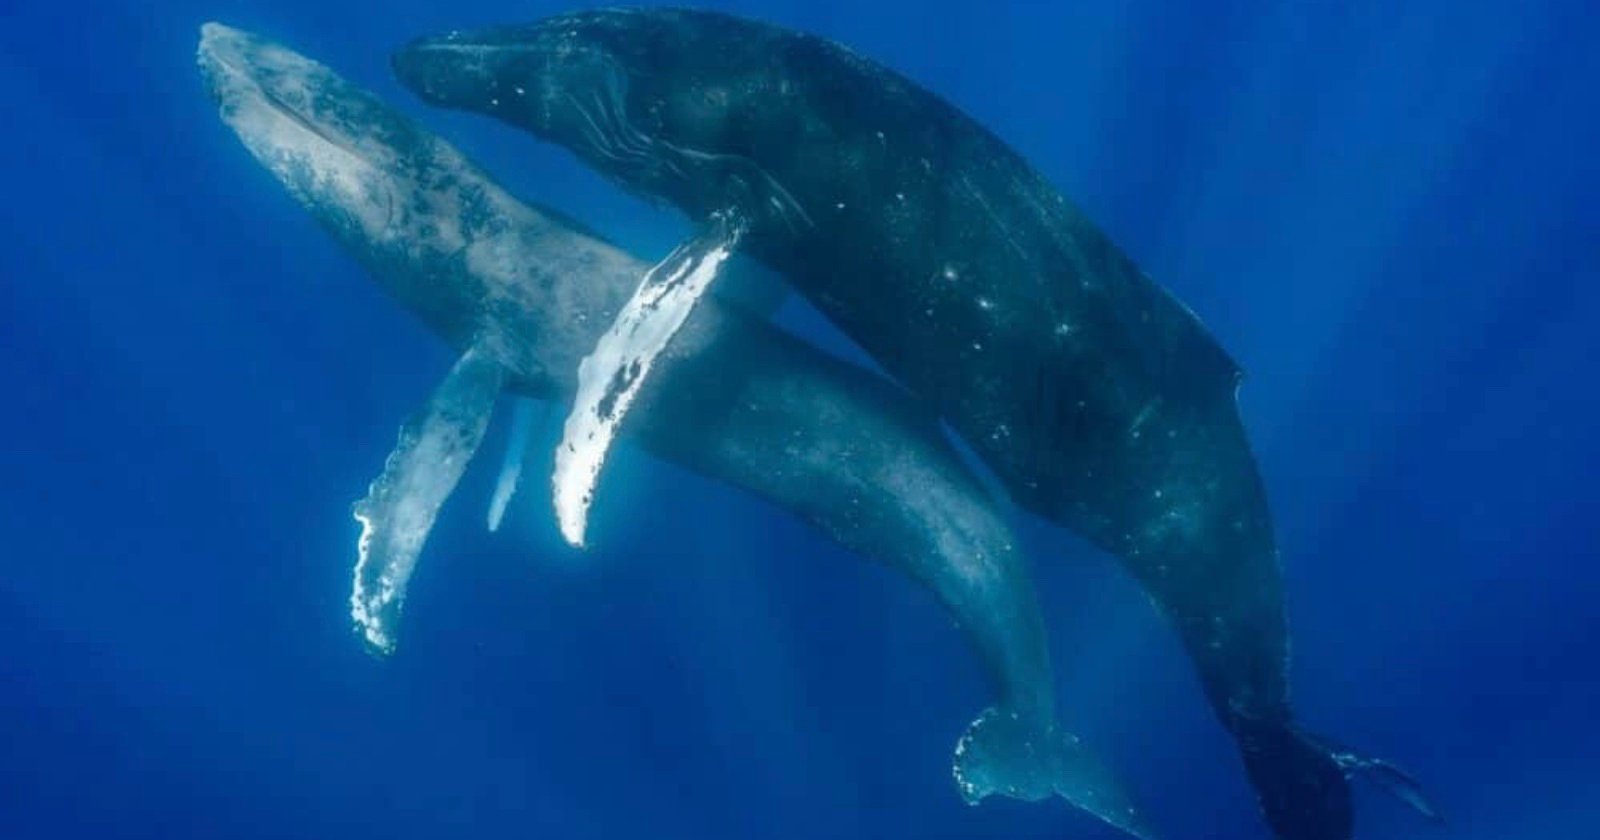 Photographers Document First Ever Instance Of Humpback Whales Mating And Its Between Males